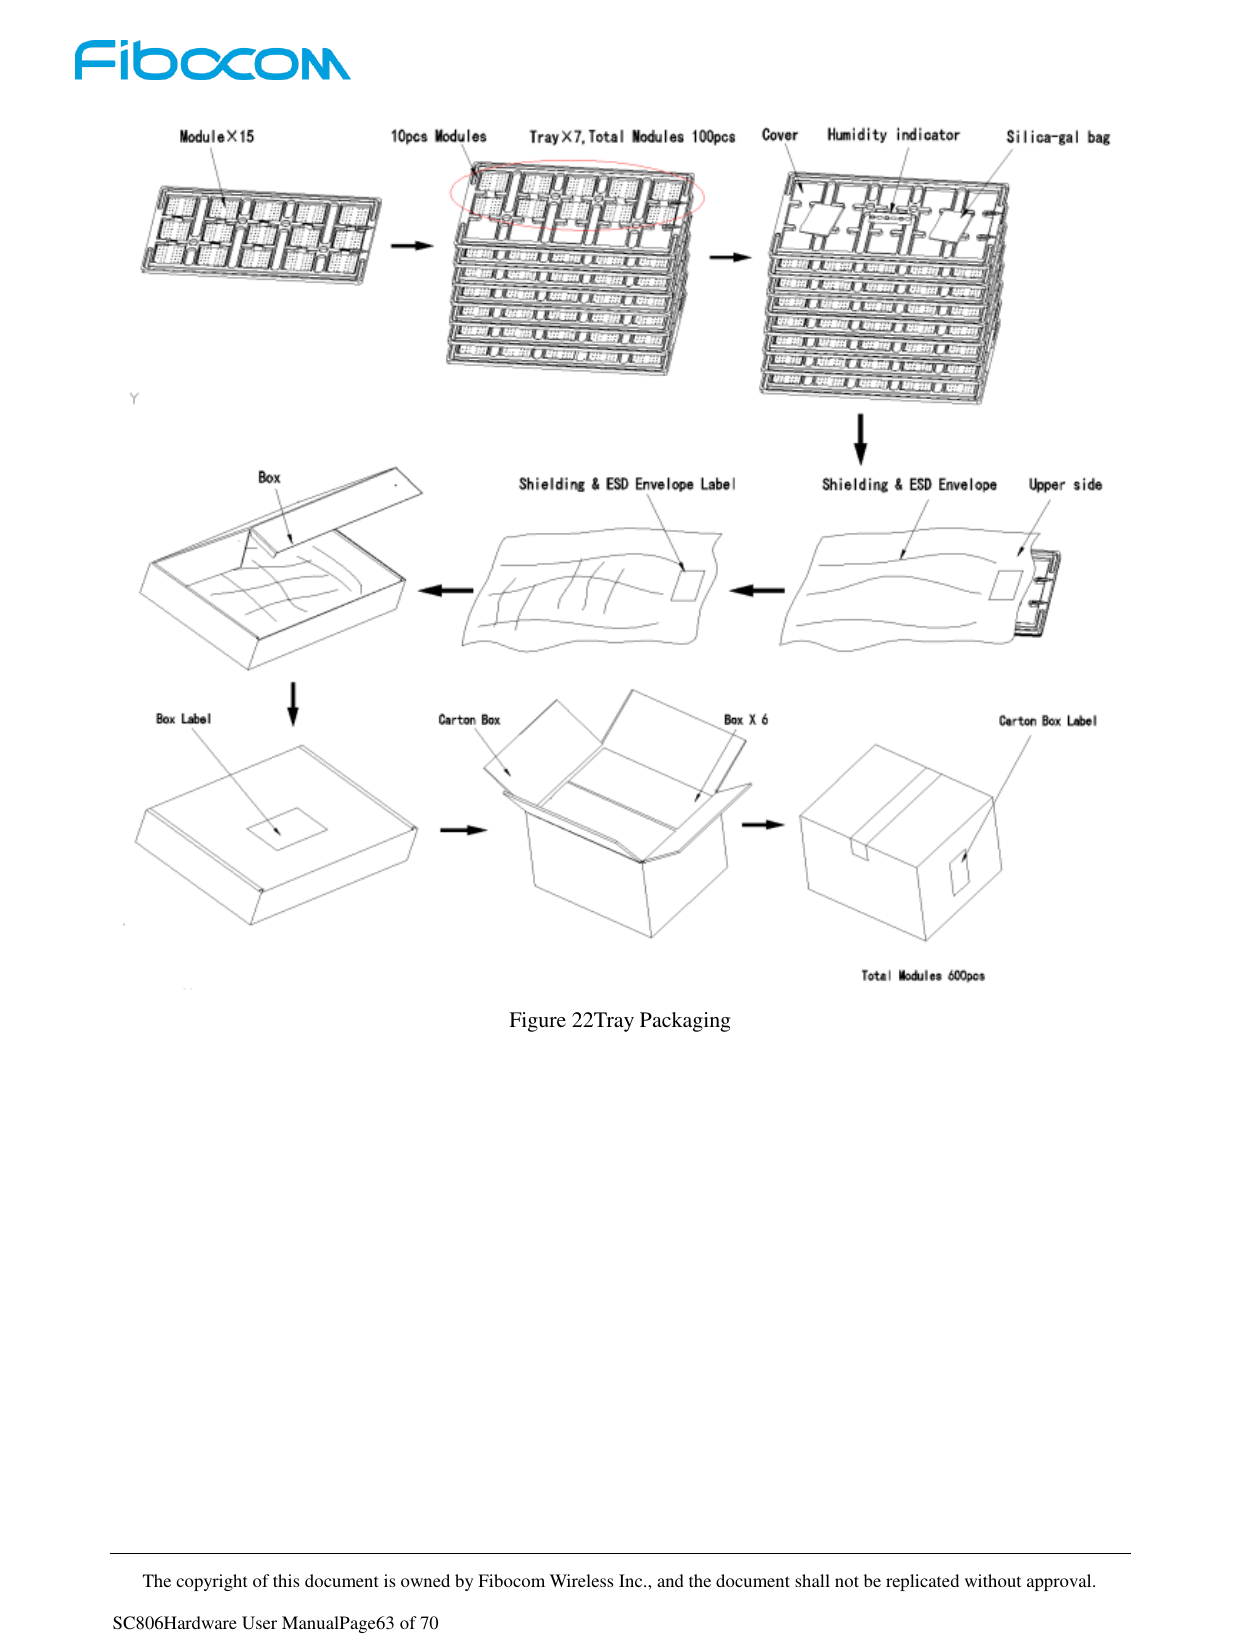     The copyright of this document is owned by Fibocom Wireless Inc., and the document shall not be replicated without approval.   SC806Hardware User ManualPage63 of 70  Figure 22Tray Packaging          